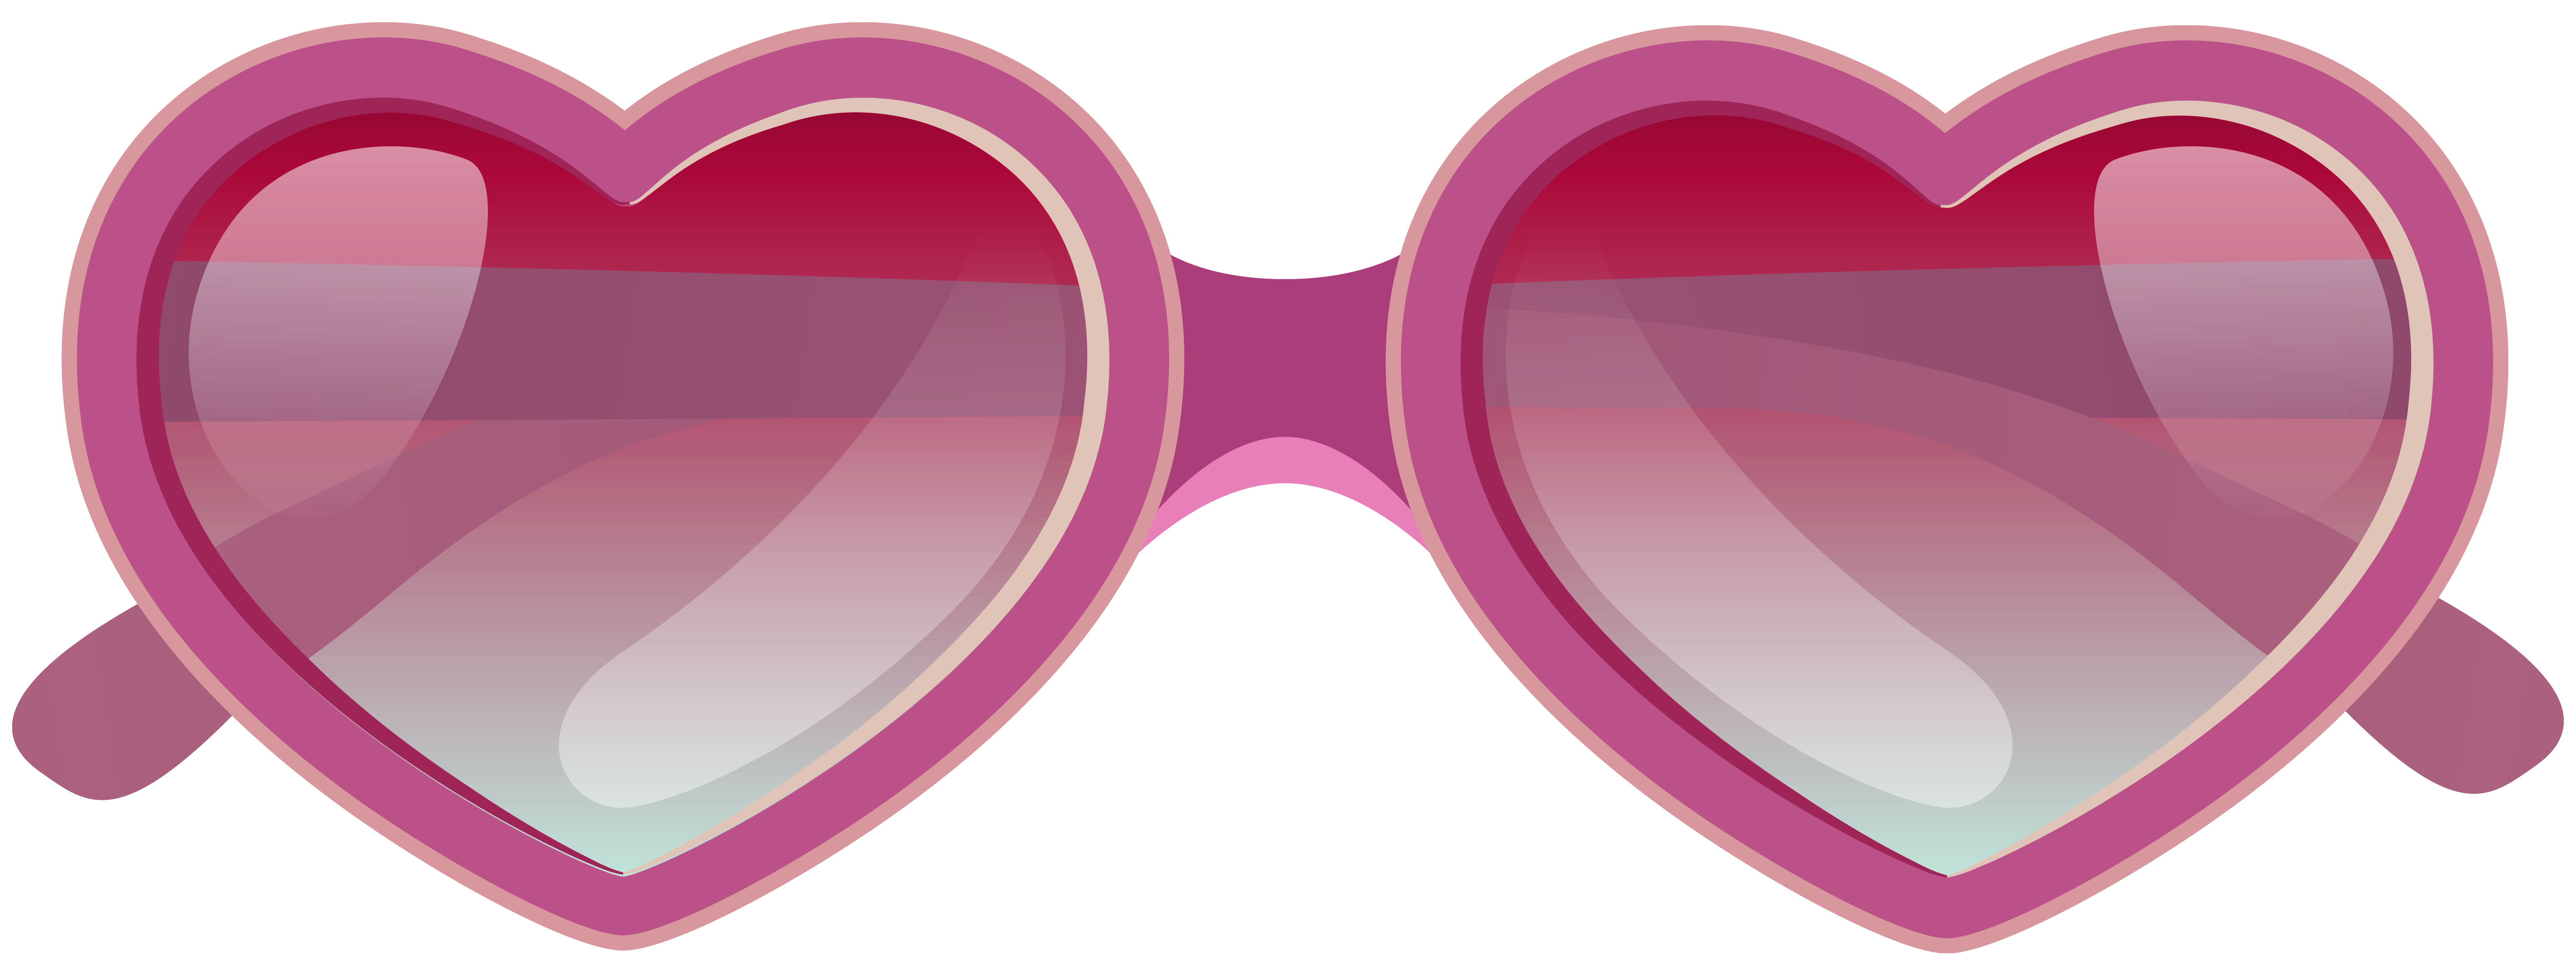 Pink Heart Sunglasses Image Png Image Clipart